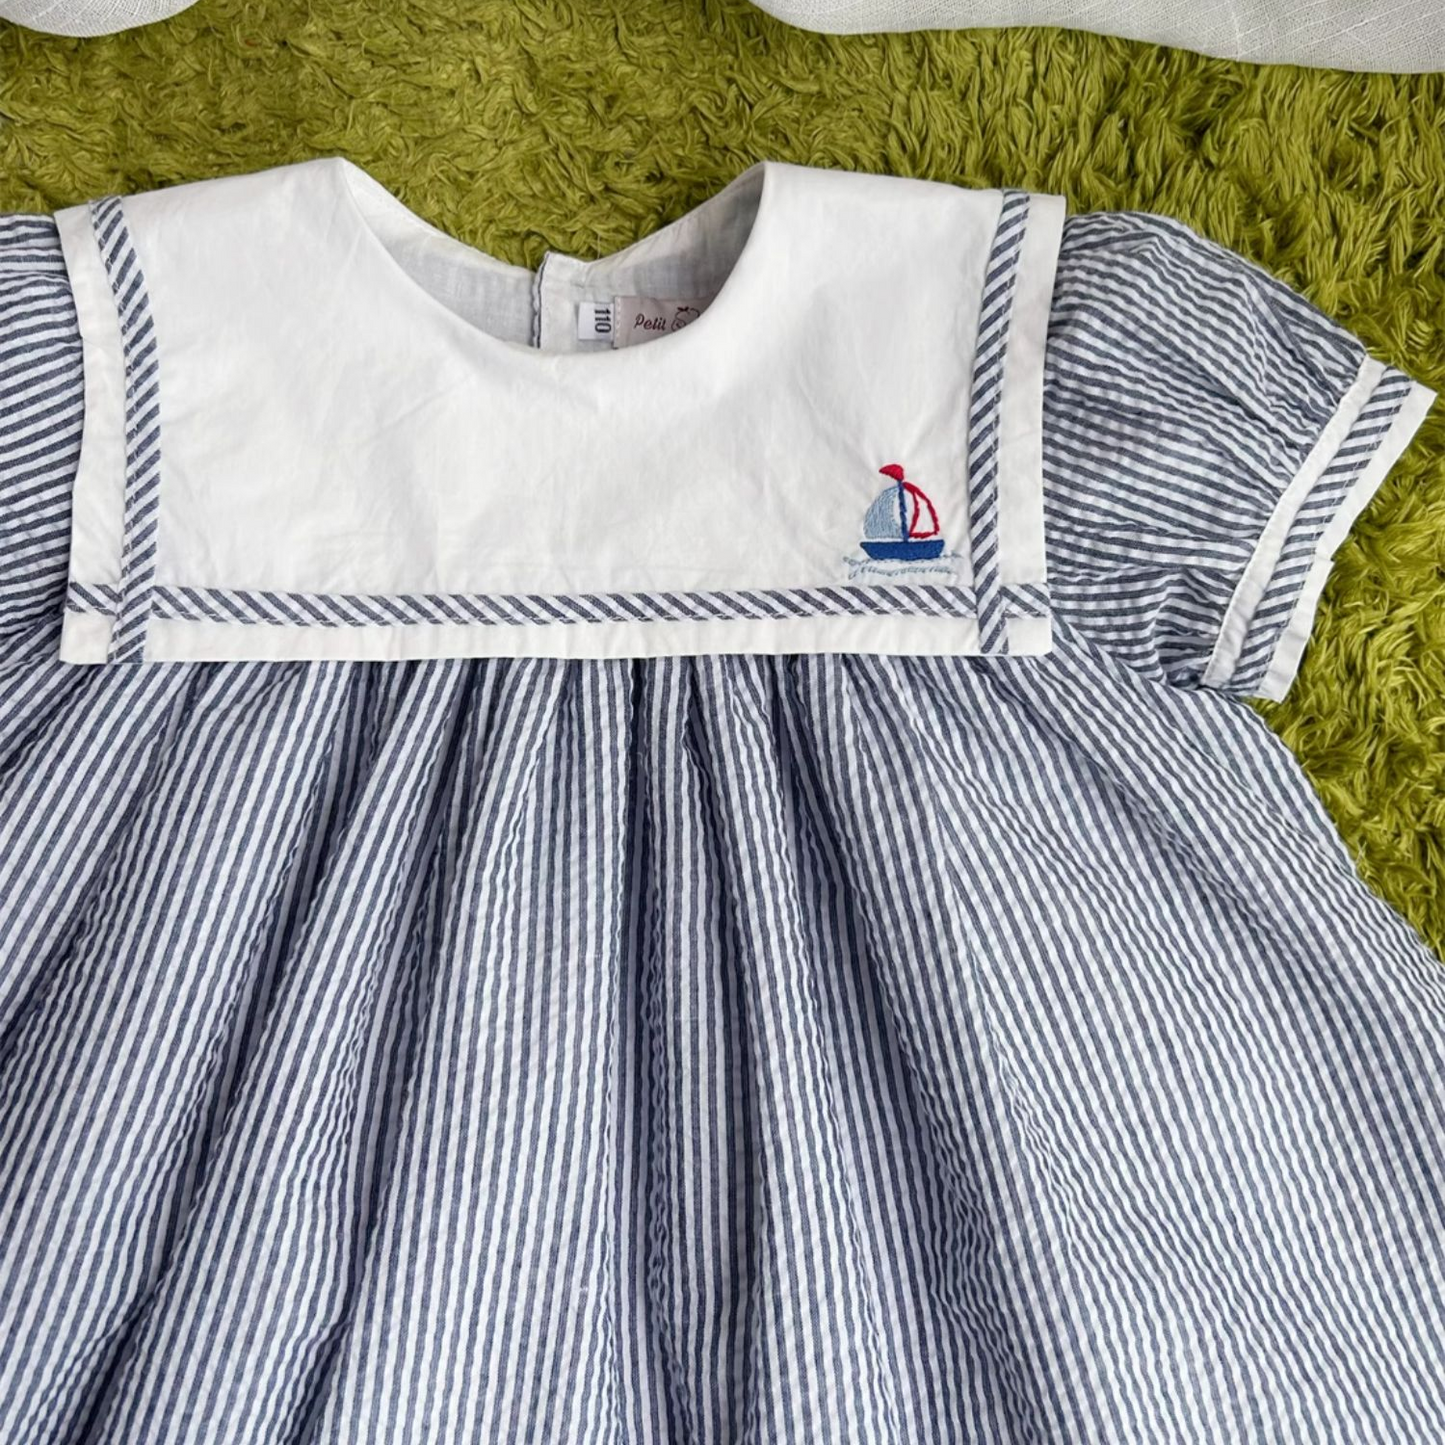 Embroidered Sail Boat Dress,2T to 7T.